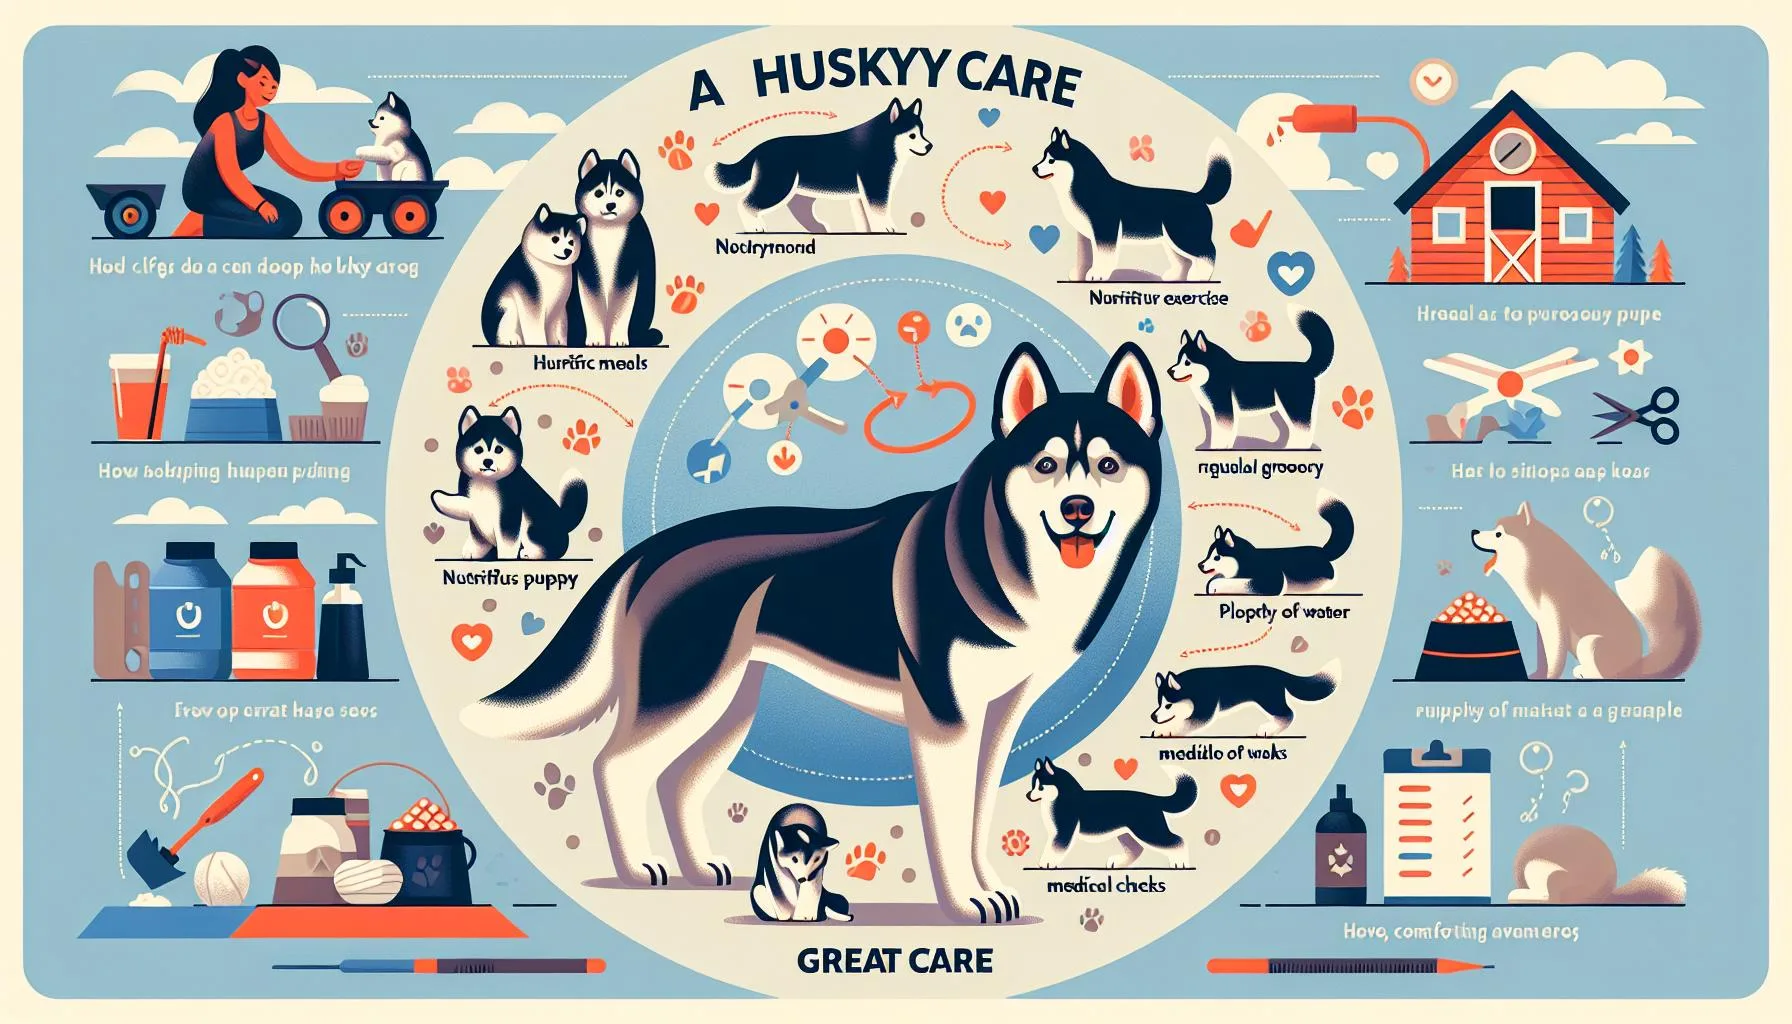 How long do husky live The Importance of Diet and Nutrition